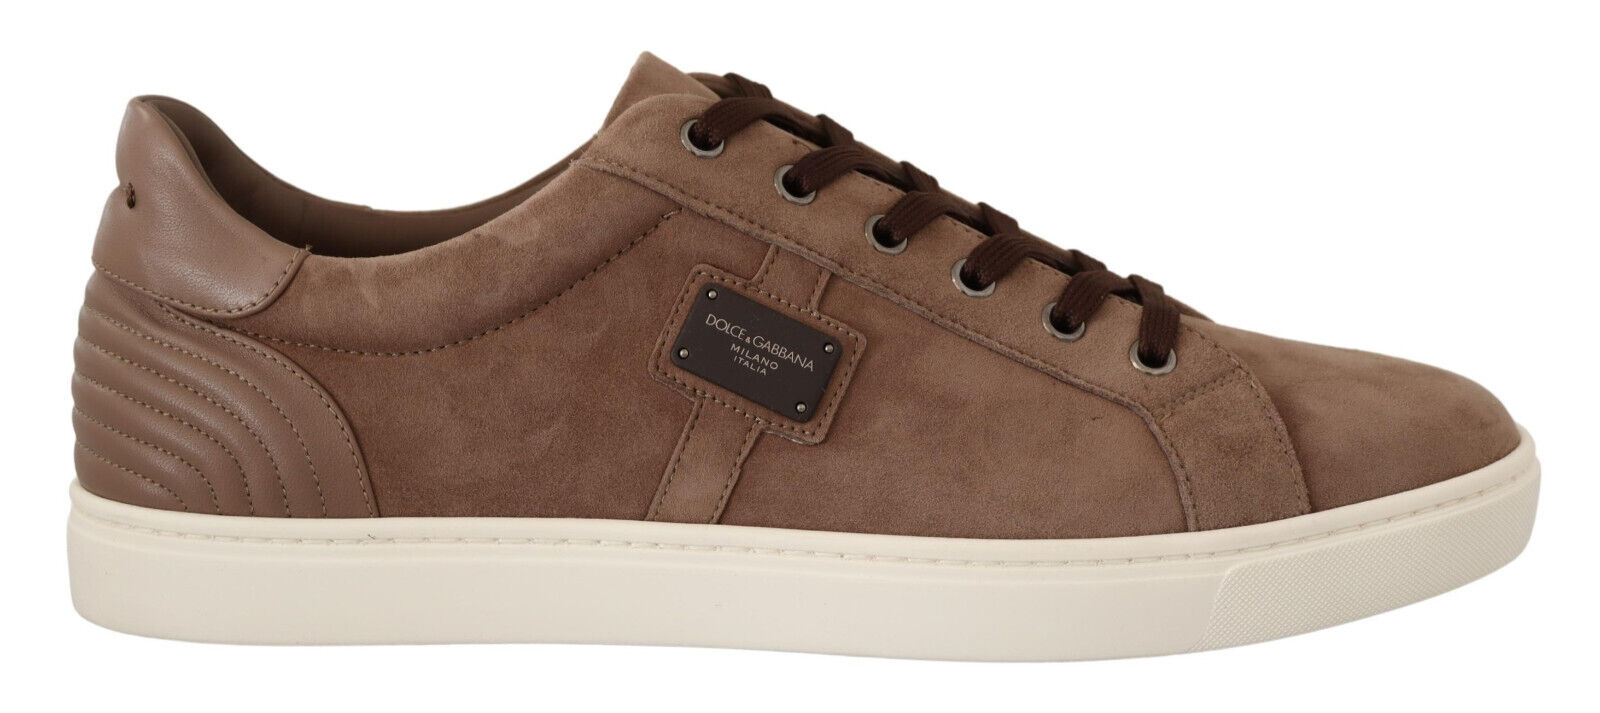 Bown Dolce & Gabbana Brown Suede Leather Sneakers Shoes